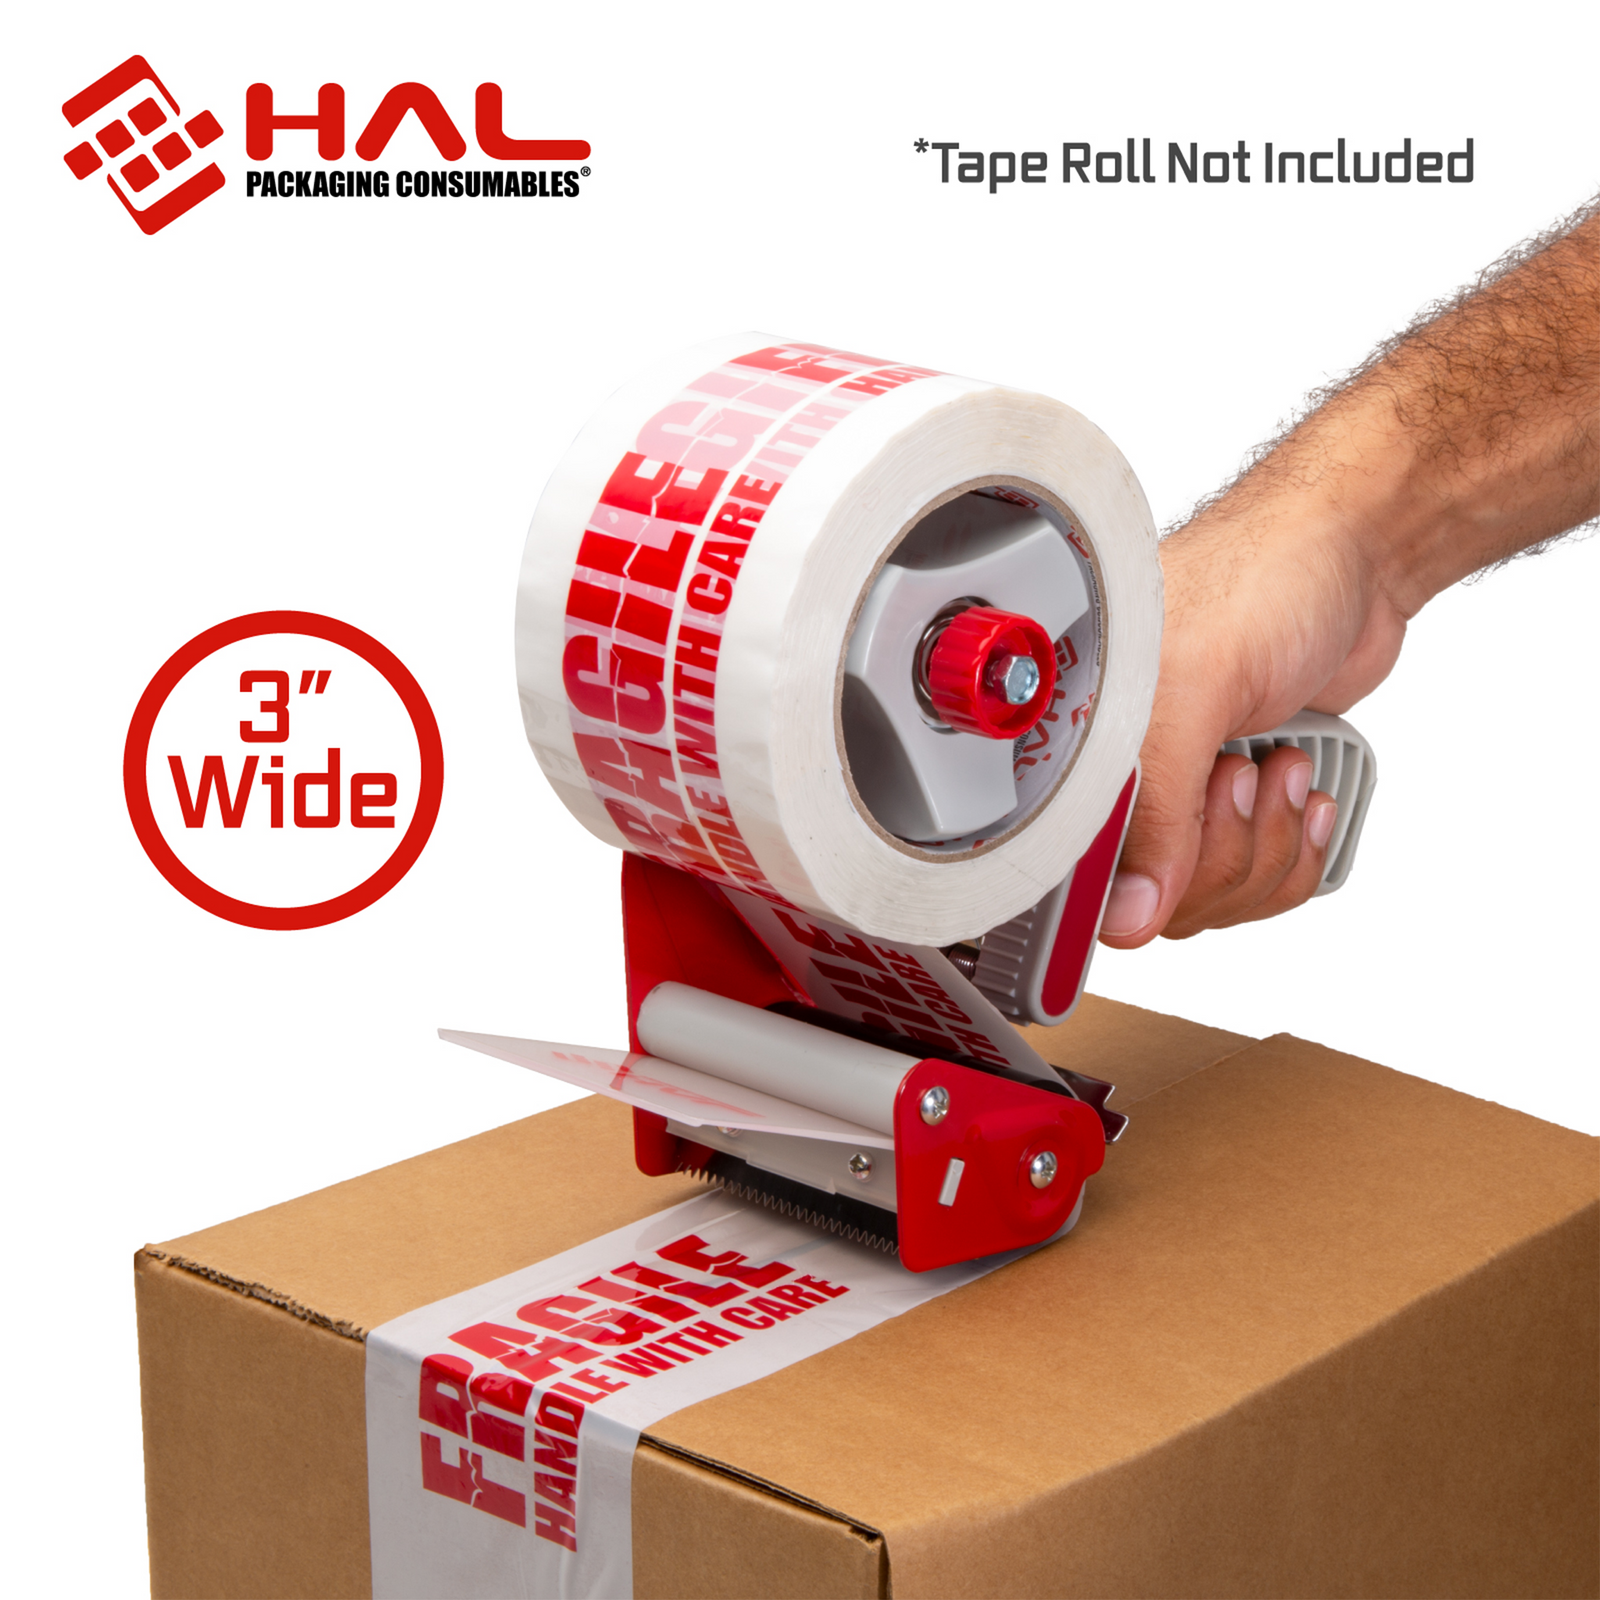 man closing box with red and white tape dispenser using white tape with stop sign. Features the red HAL logo and 3